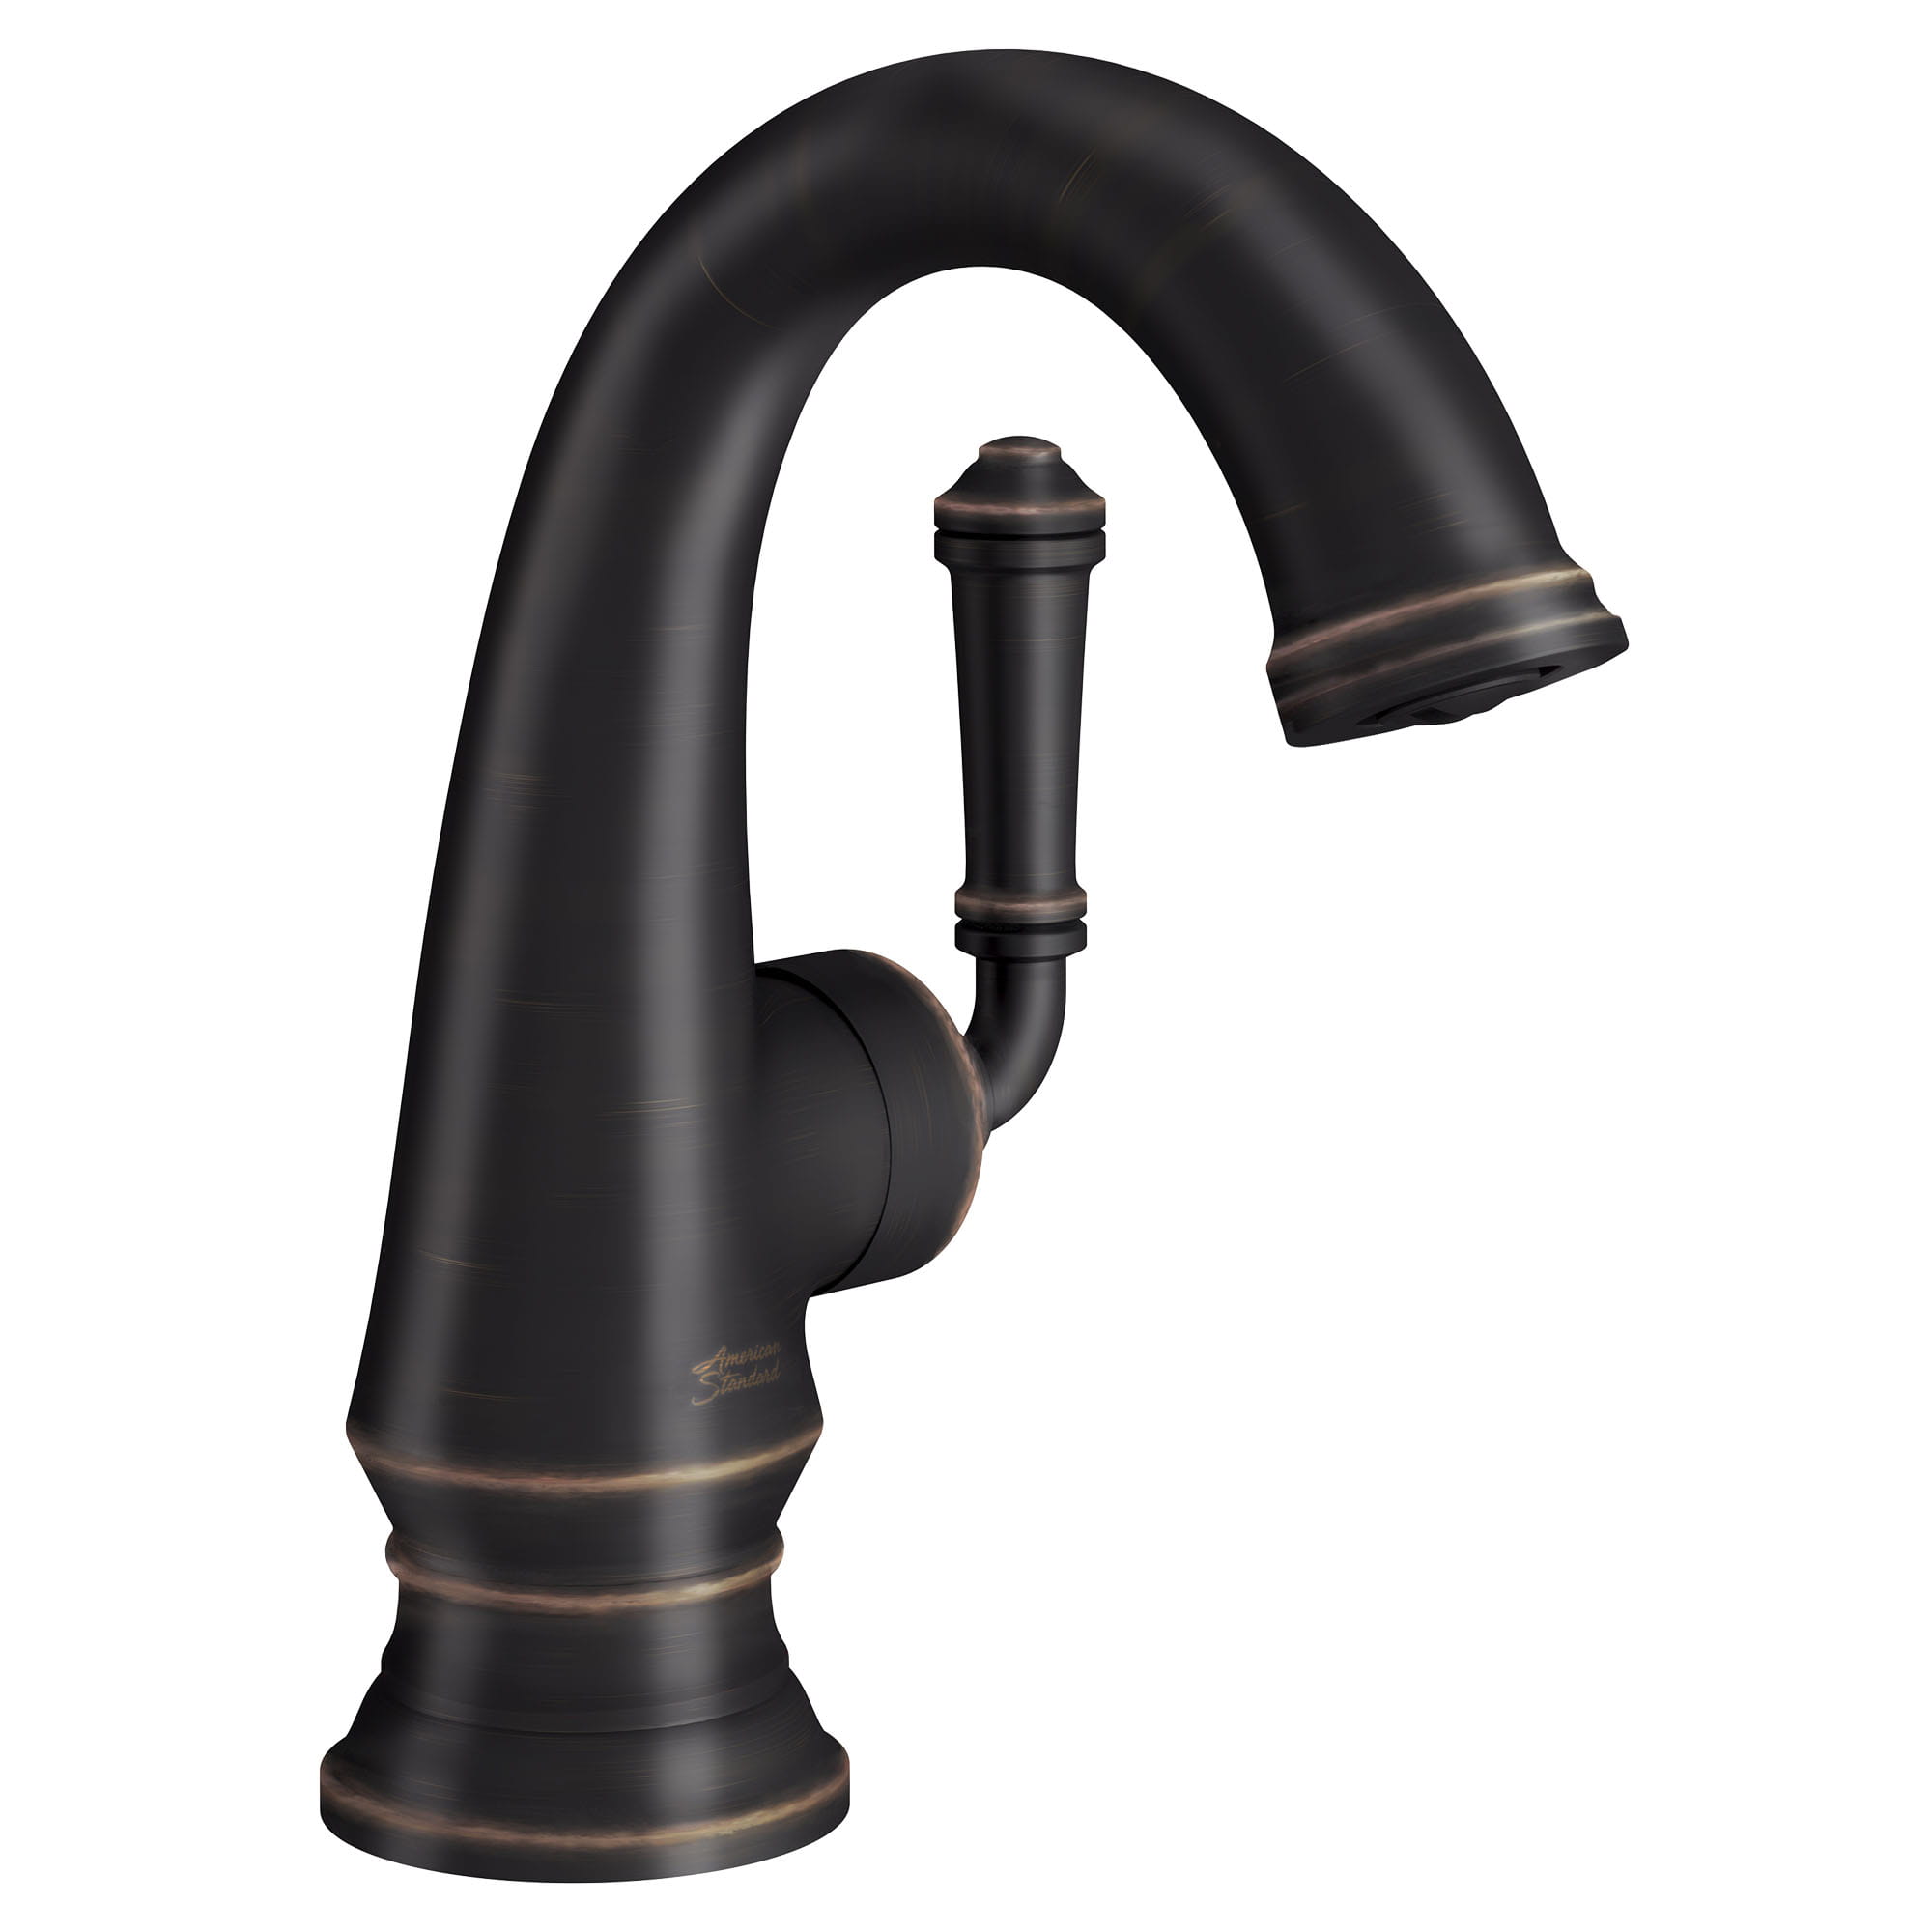 Delancey Single Hole Single Handle Bathroom Faucet 12 gpm 45 L min With Lever Handle LEGACY BRONZE